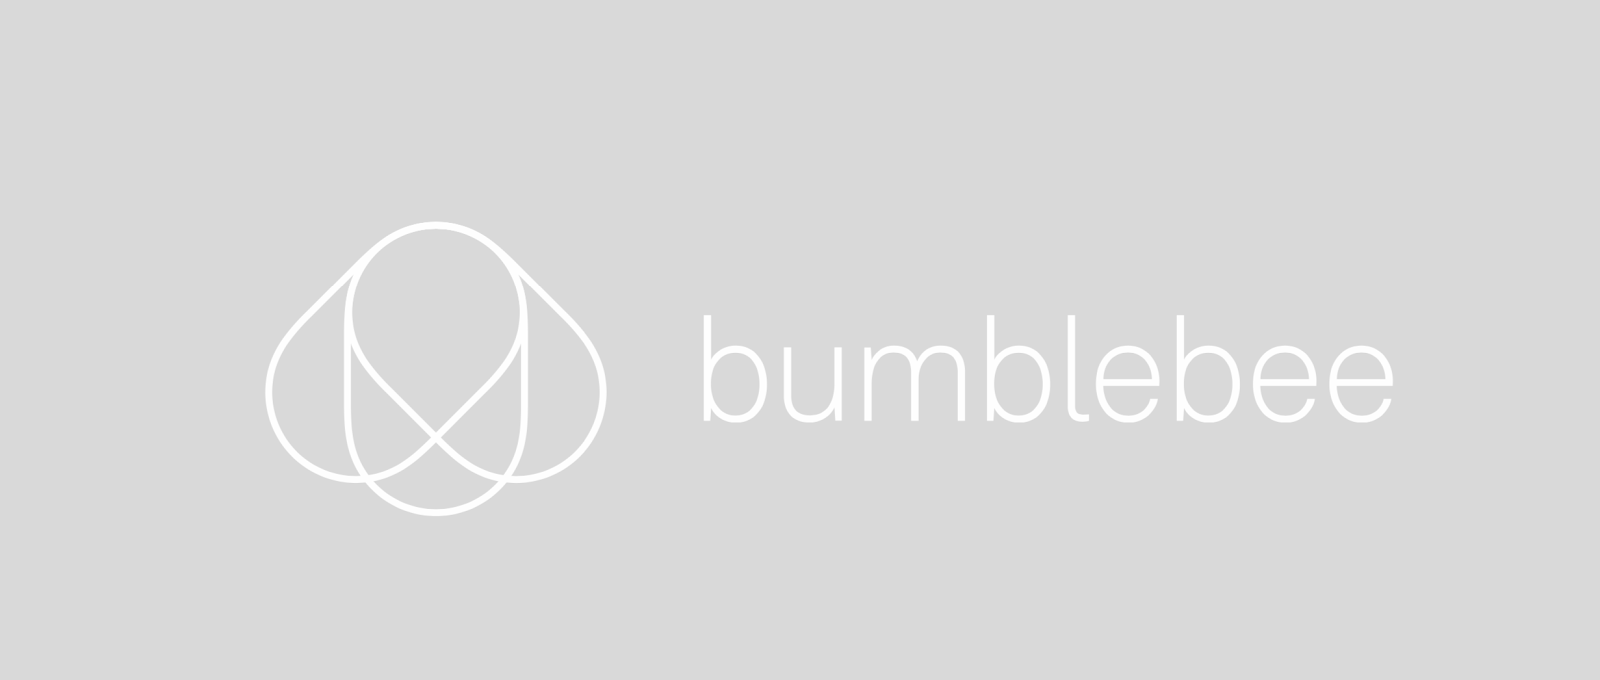 Rethinking Your Living Space With Bumblebee Spaces - Toyota AI Ventures ...